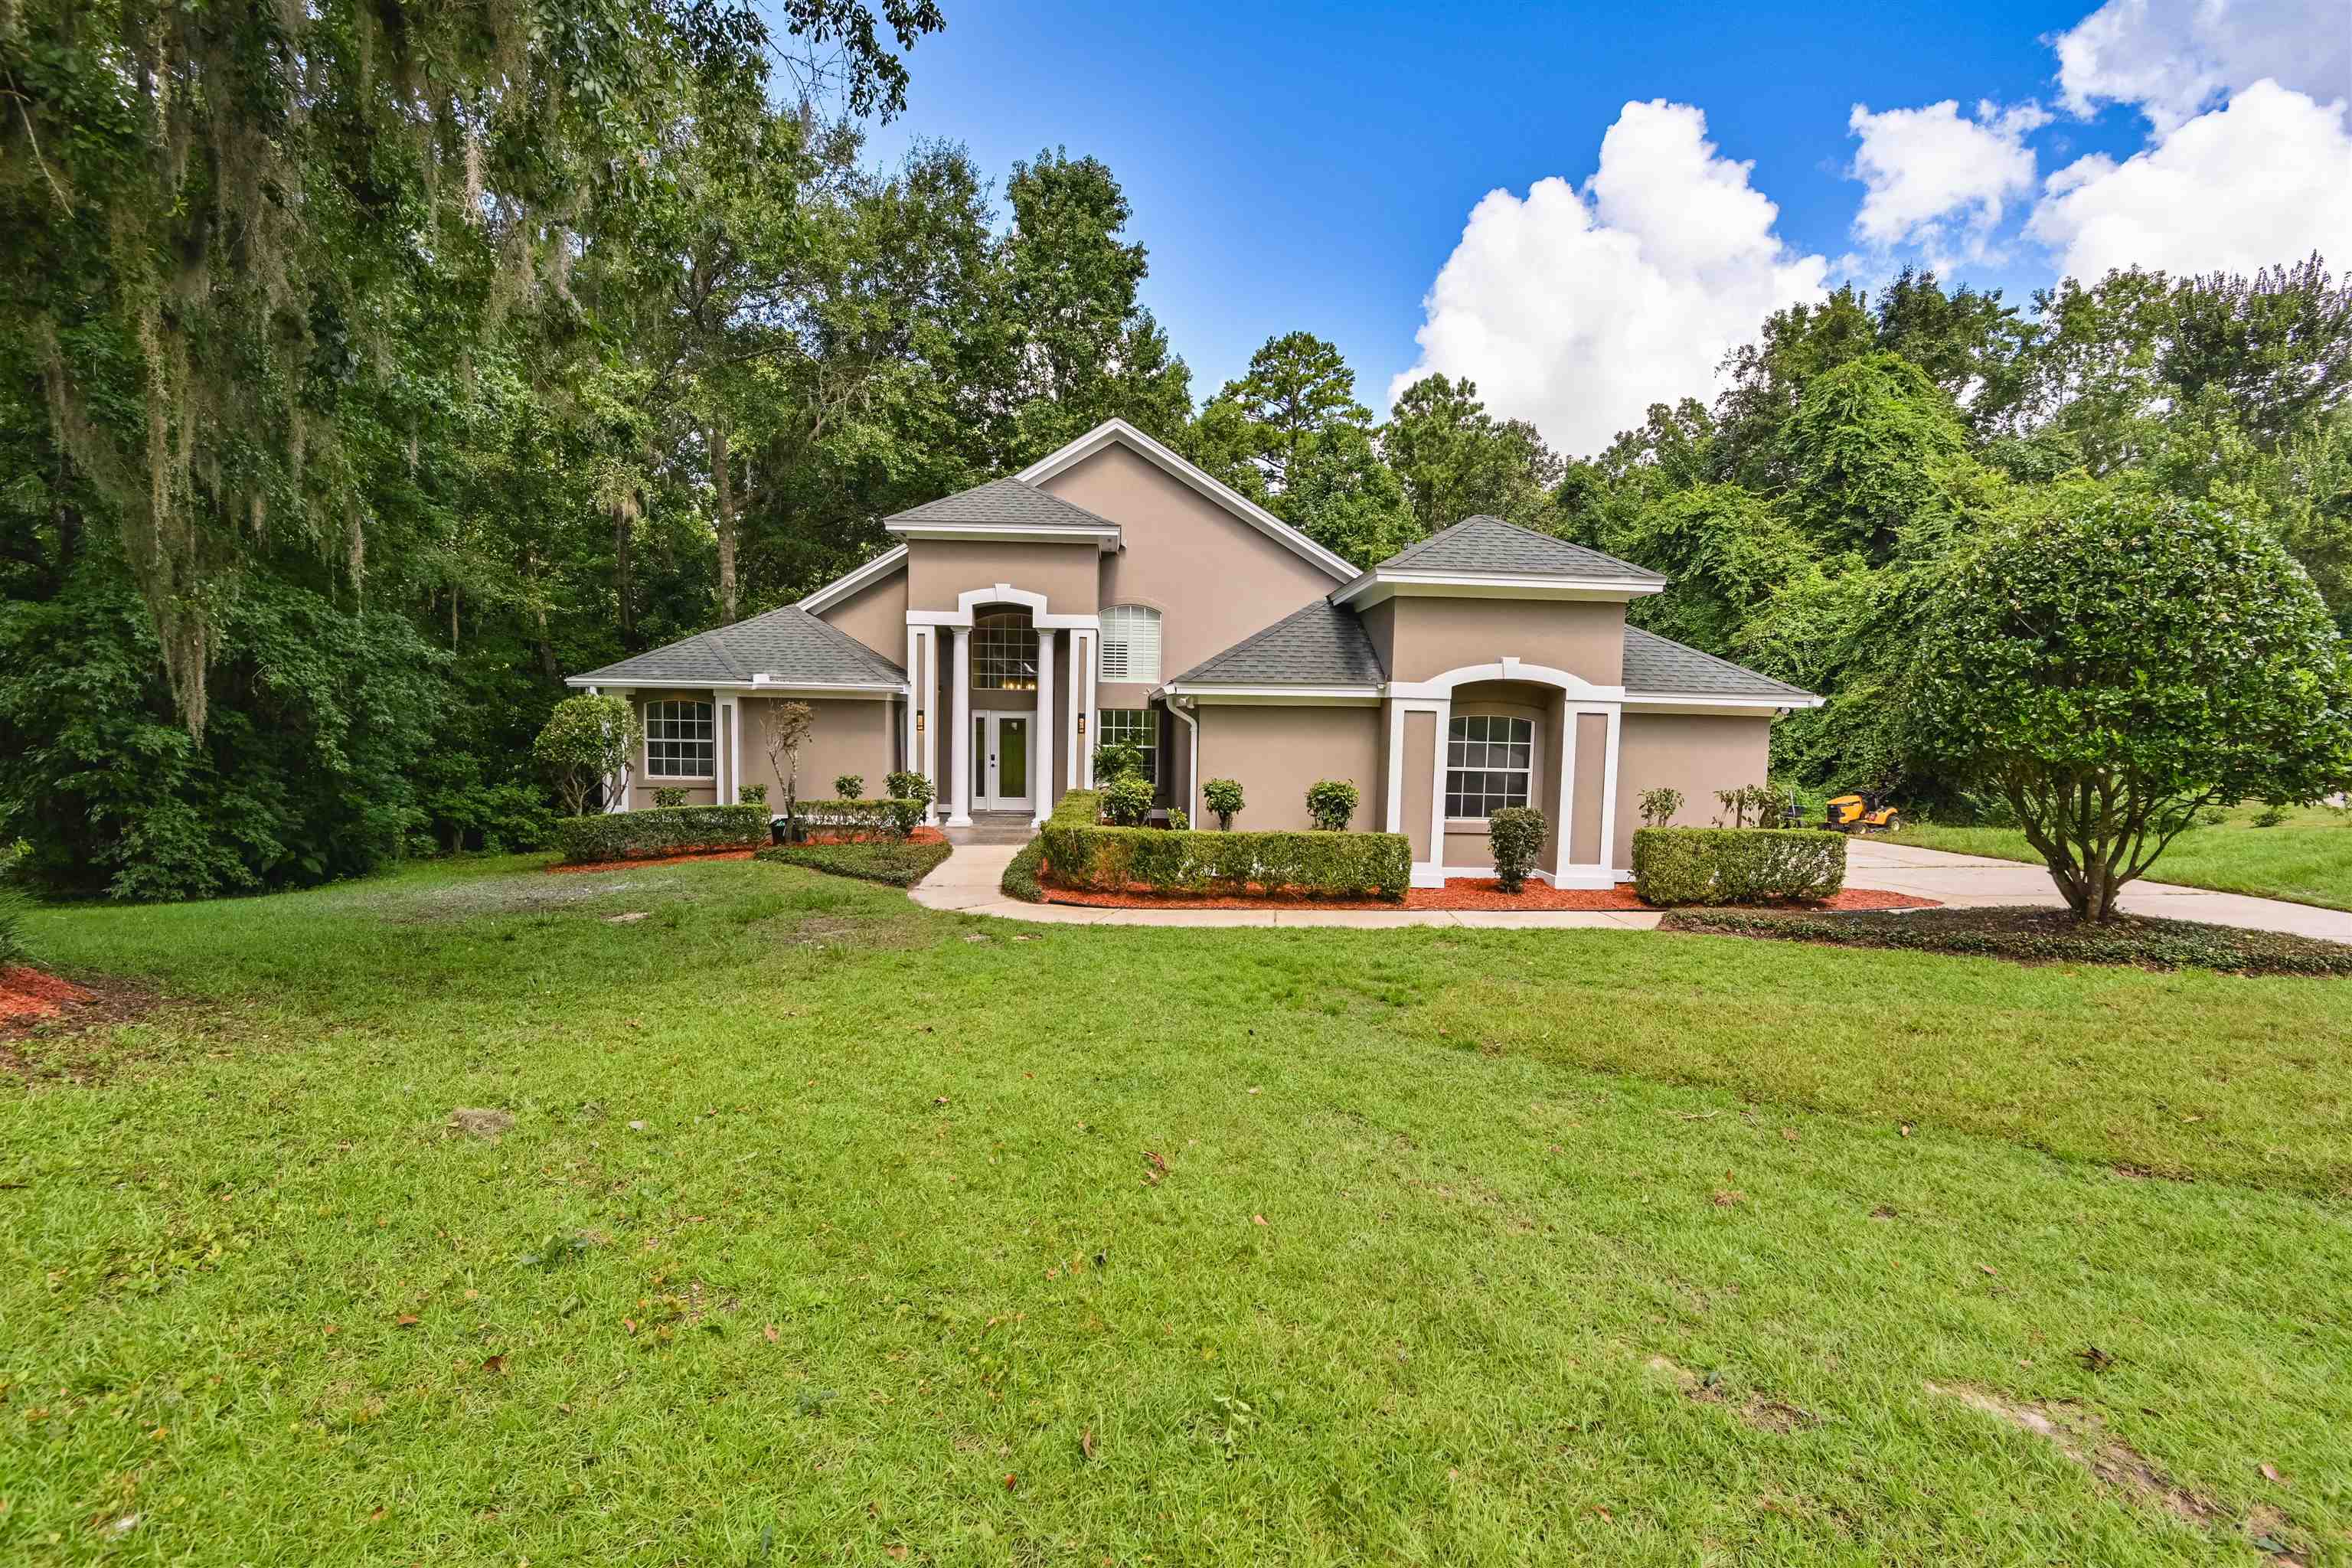 7708 Summer Tanager Drive, TALLAHASSEE, FL 32312